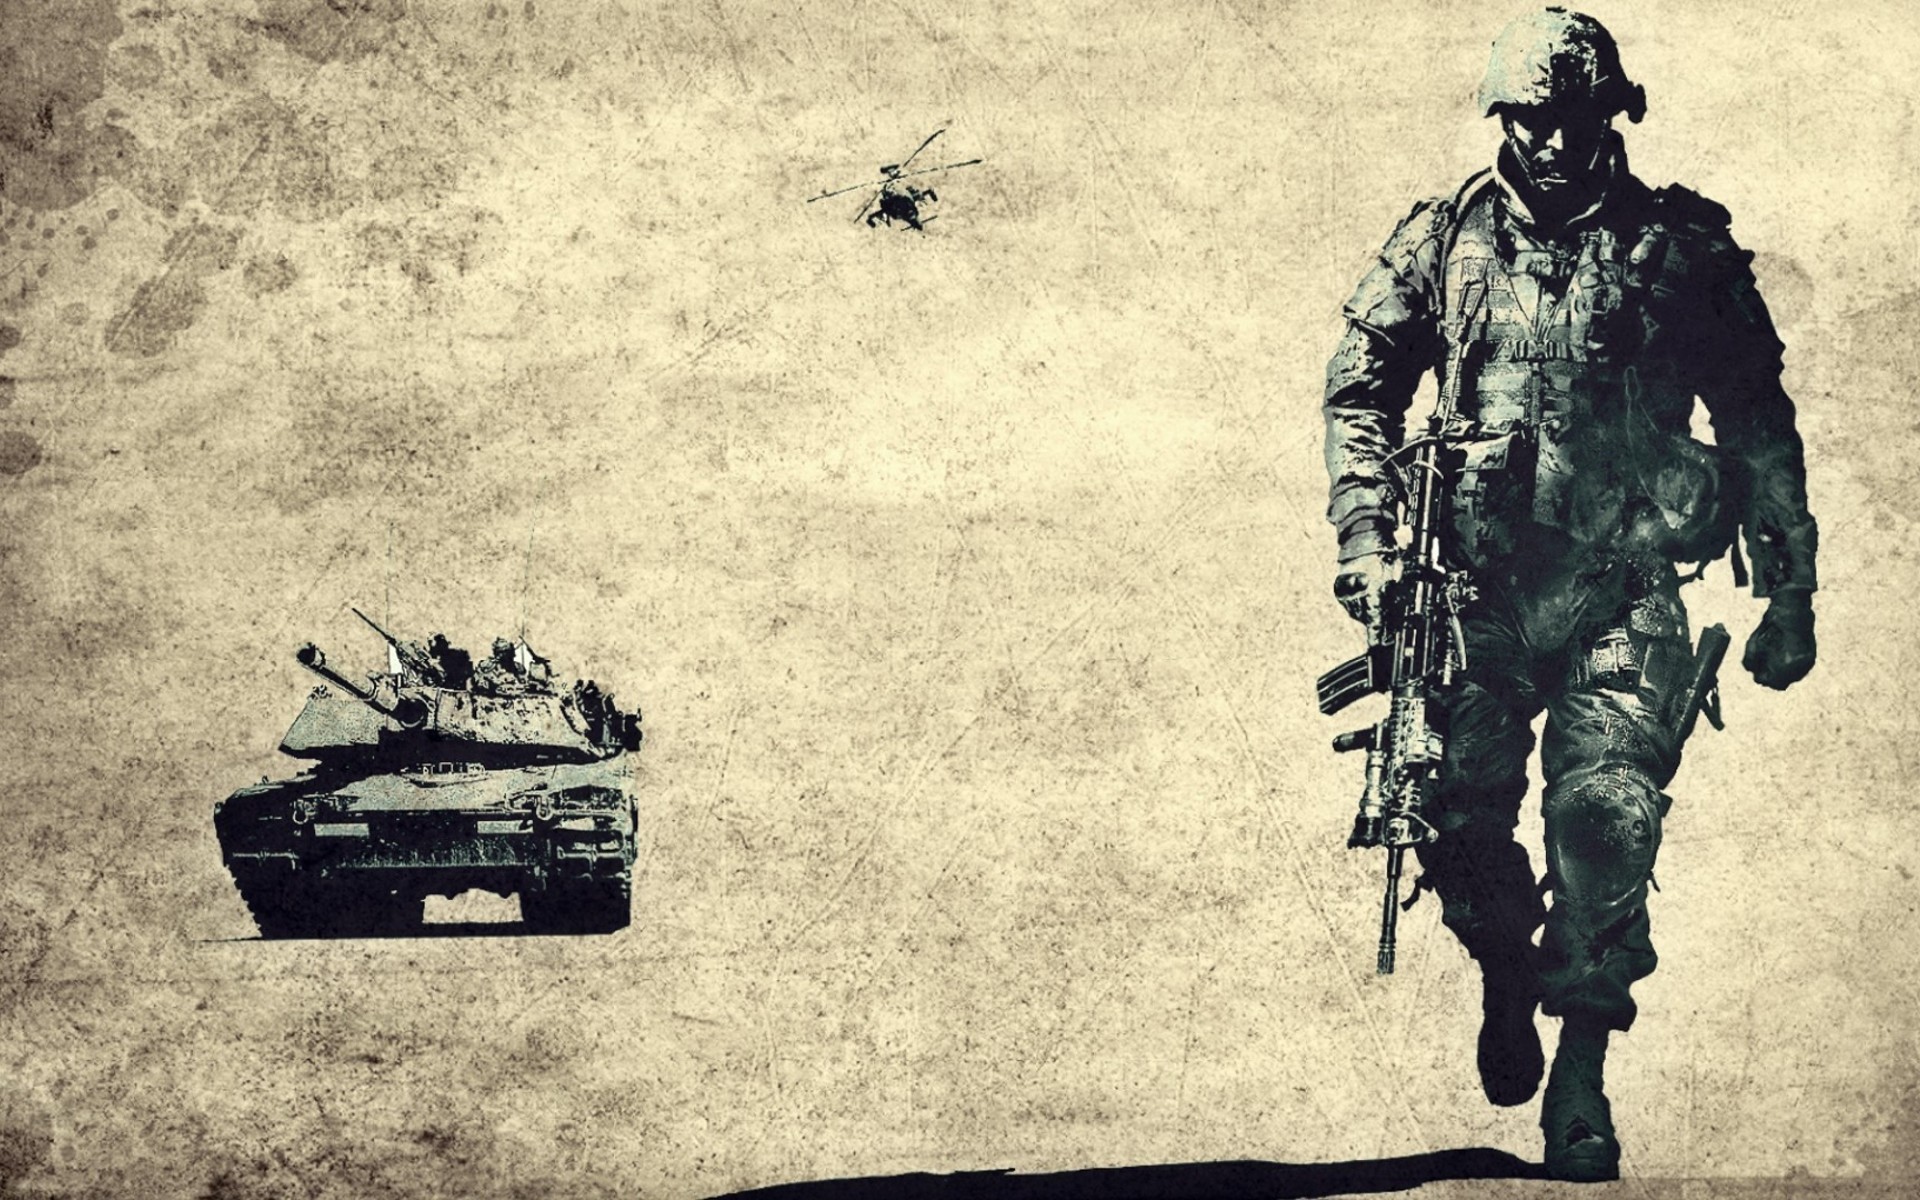 Res - 1920x1080, - Army Background , HD Wallpaper & Backgrounds